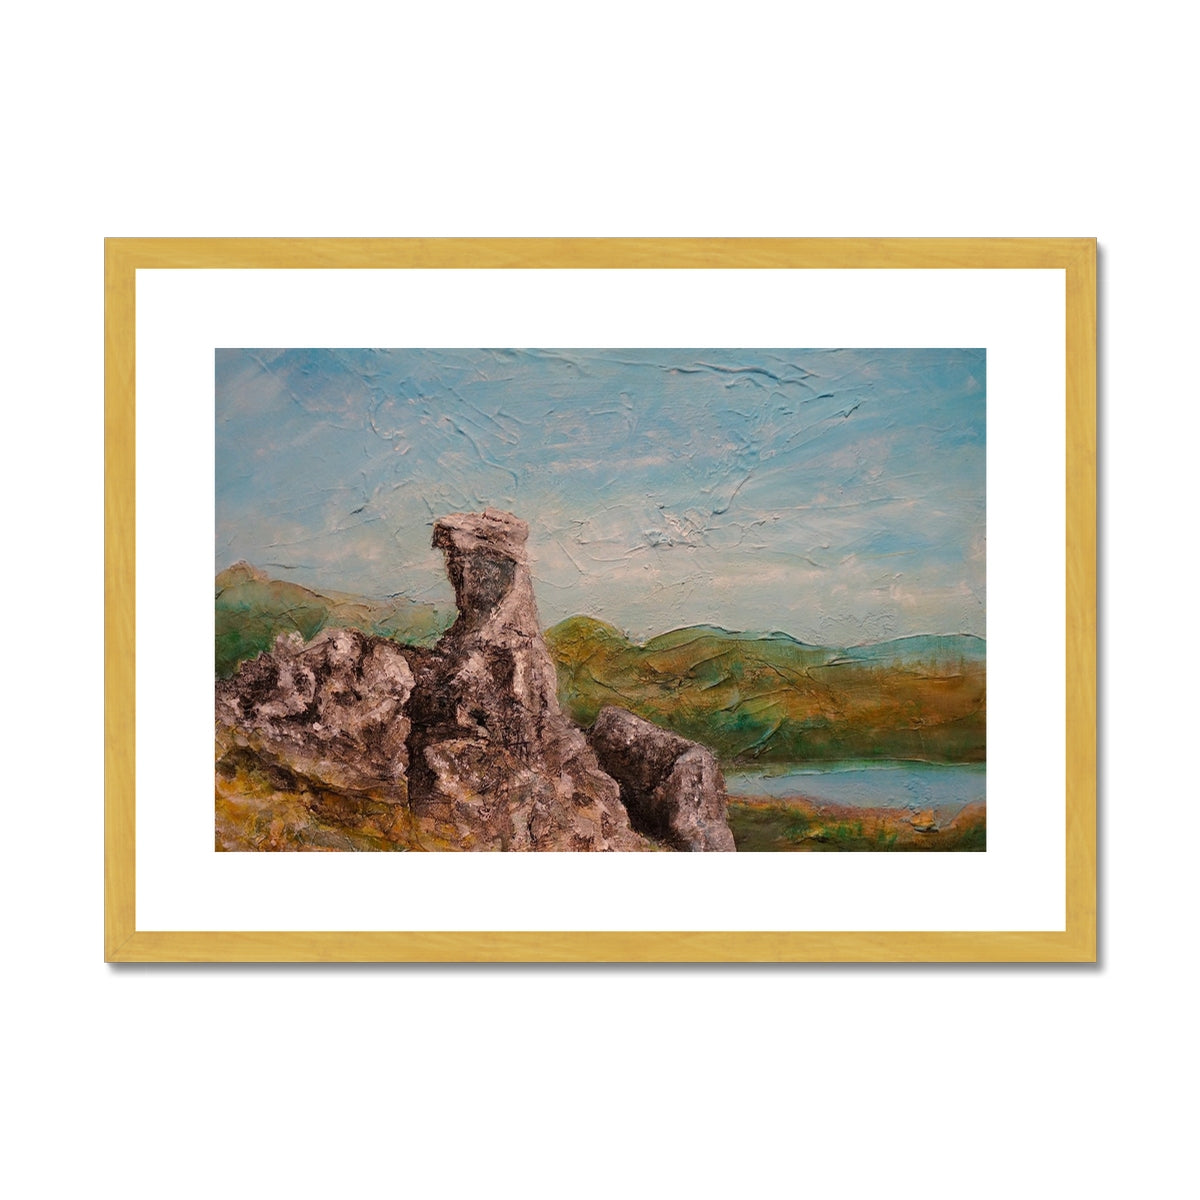 The Cobbler ii Painting | Antique Framed & Mounted Prints From Scotland-Antique Framed & Mounted Prints-Scottish Lochs & Mountains Art Gallery-A2 Landscape-Gold Frame-Paintings, Prints, Homeware, Art Gifts From Scotland By Scottish Artist Kevin Hunter